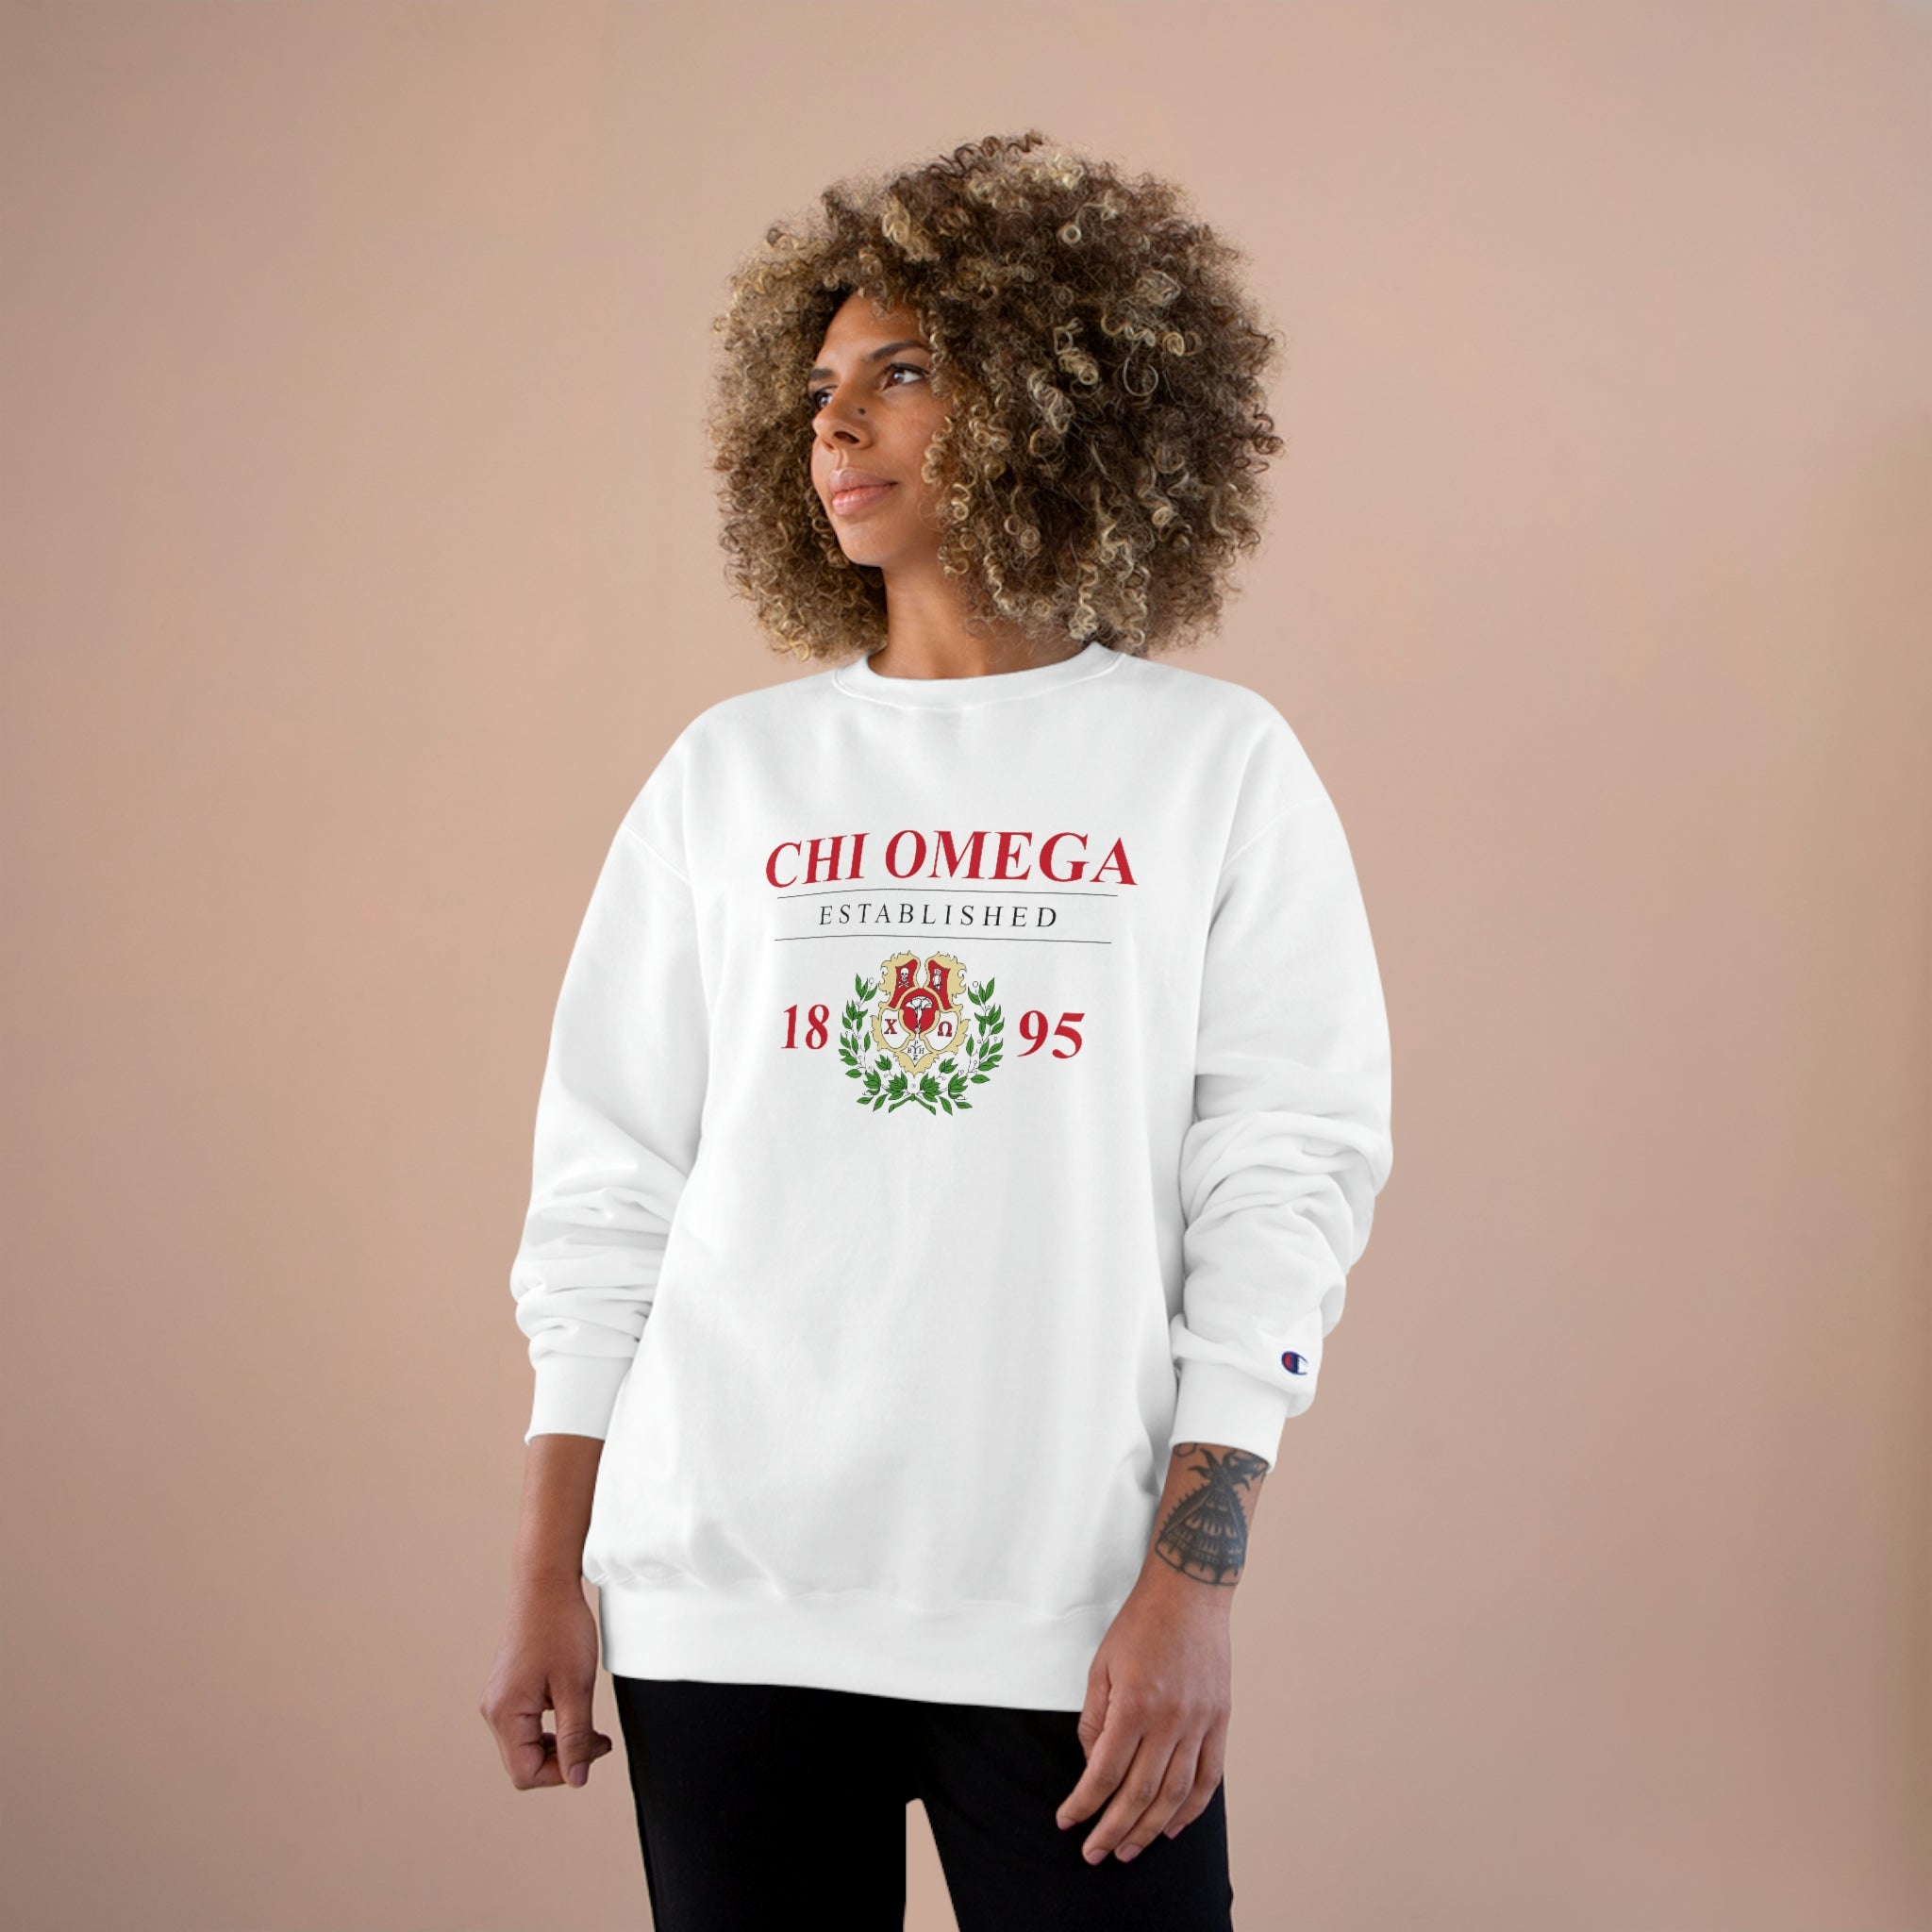 Chi Omega with Crest Champion Sweatshirt - Sorority Apparel - Chi O Gifts White / 2XL